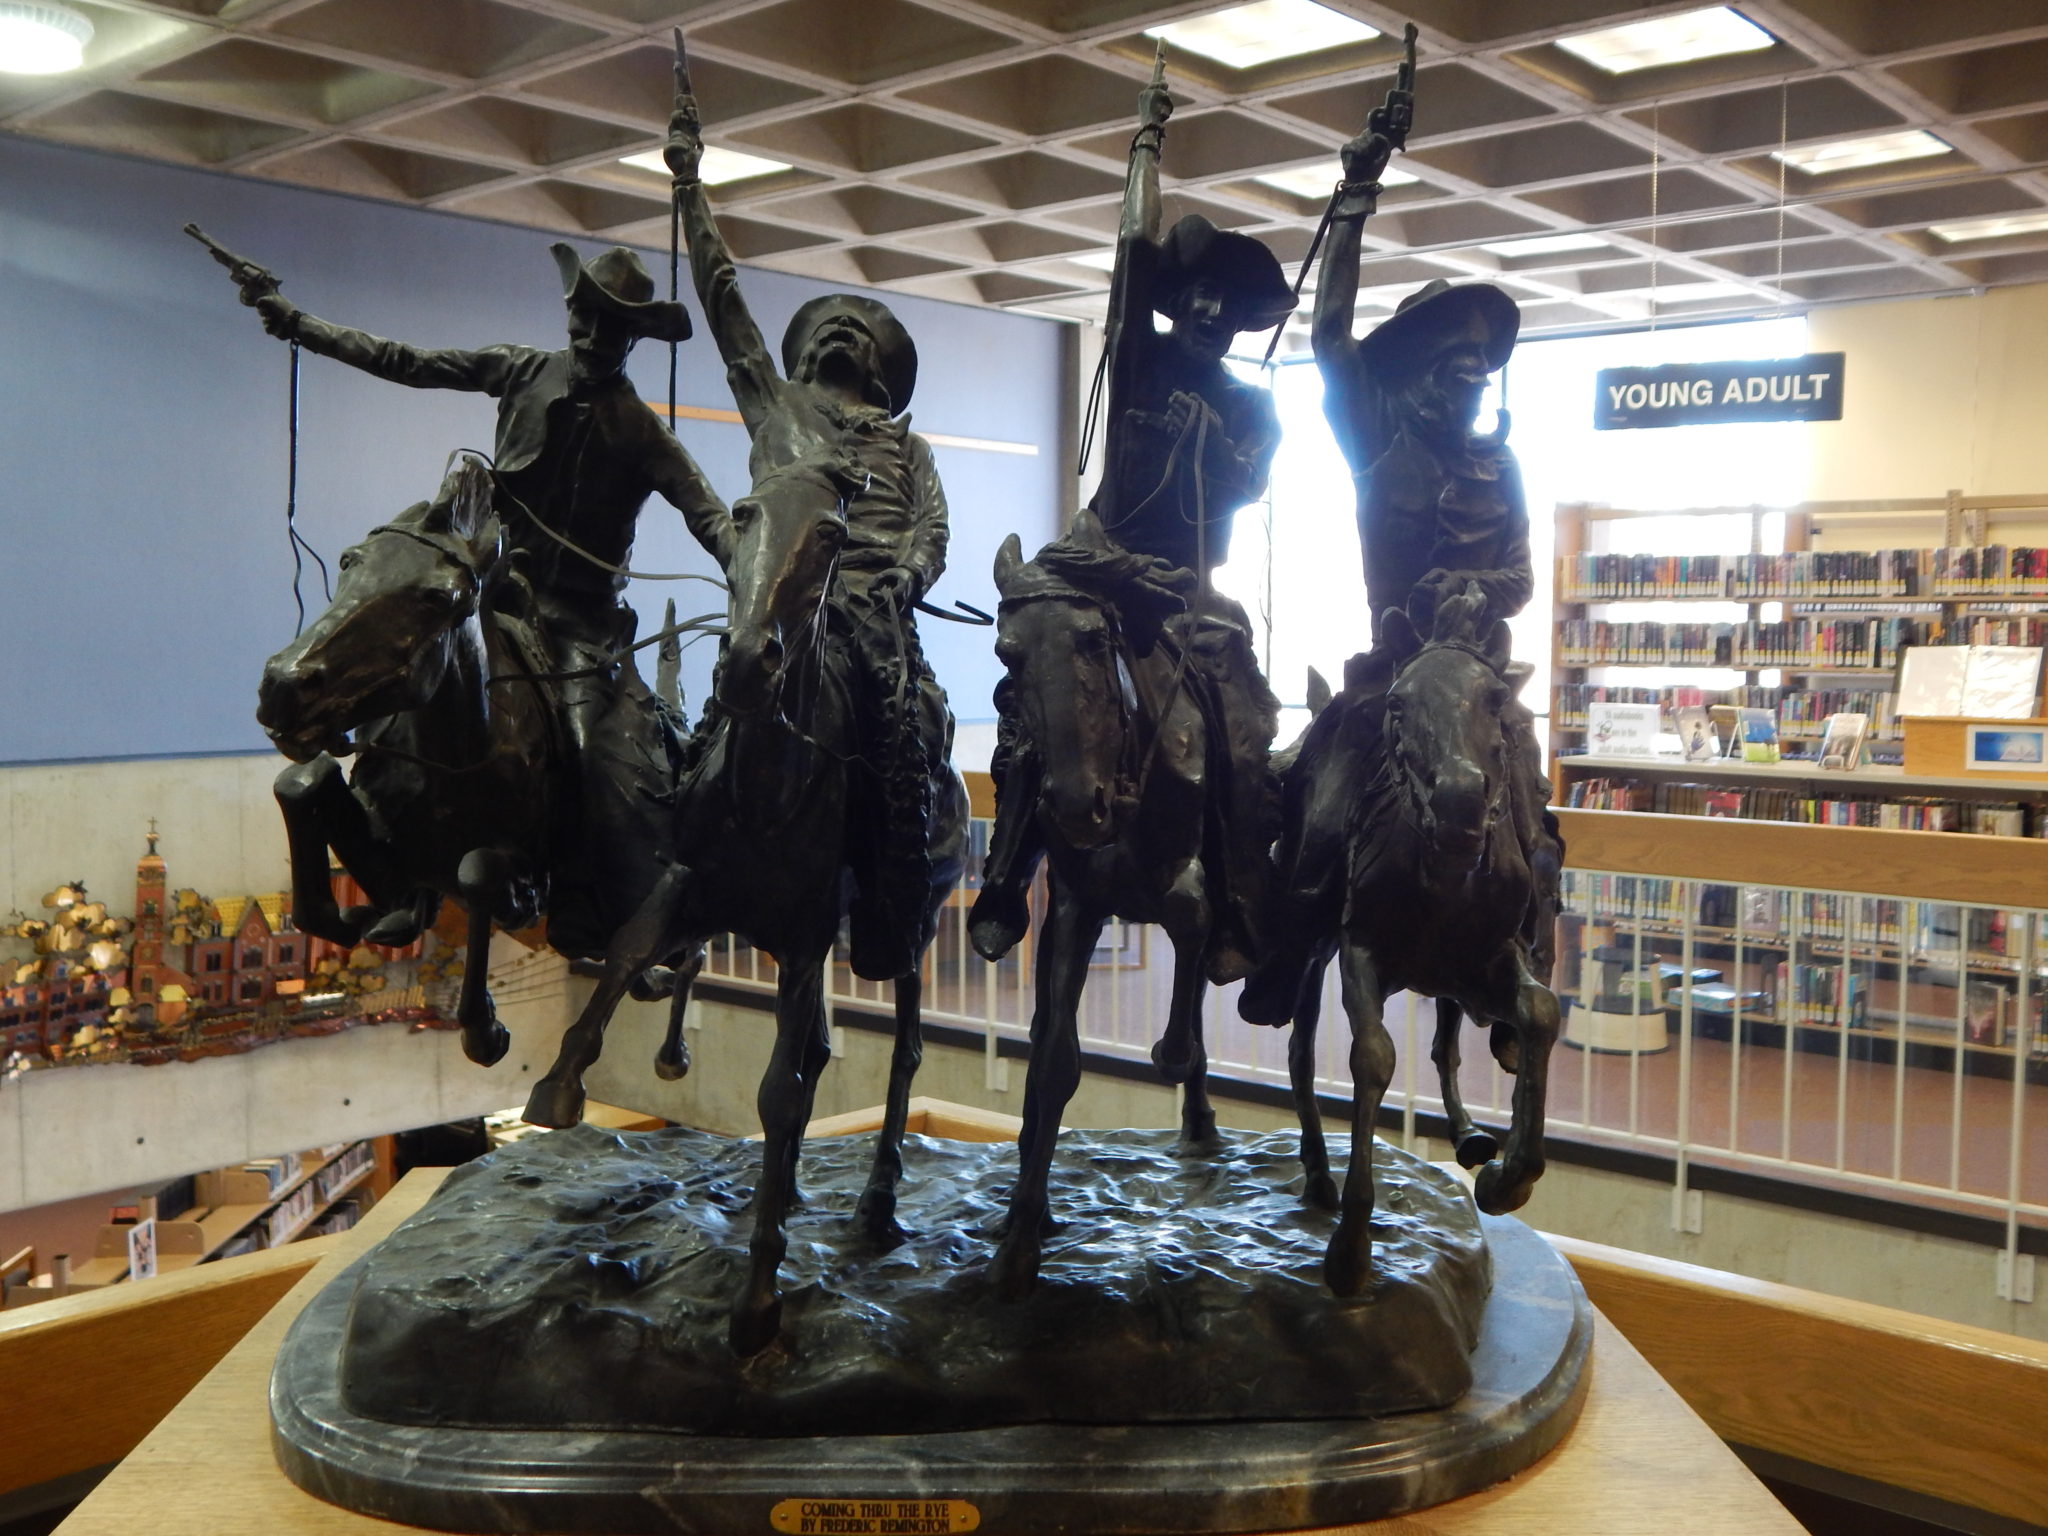 Sculpture - "Coming Through the Rye"- bronze by Frederic Remington